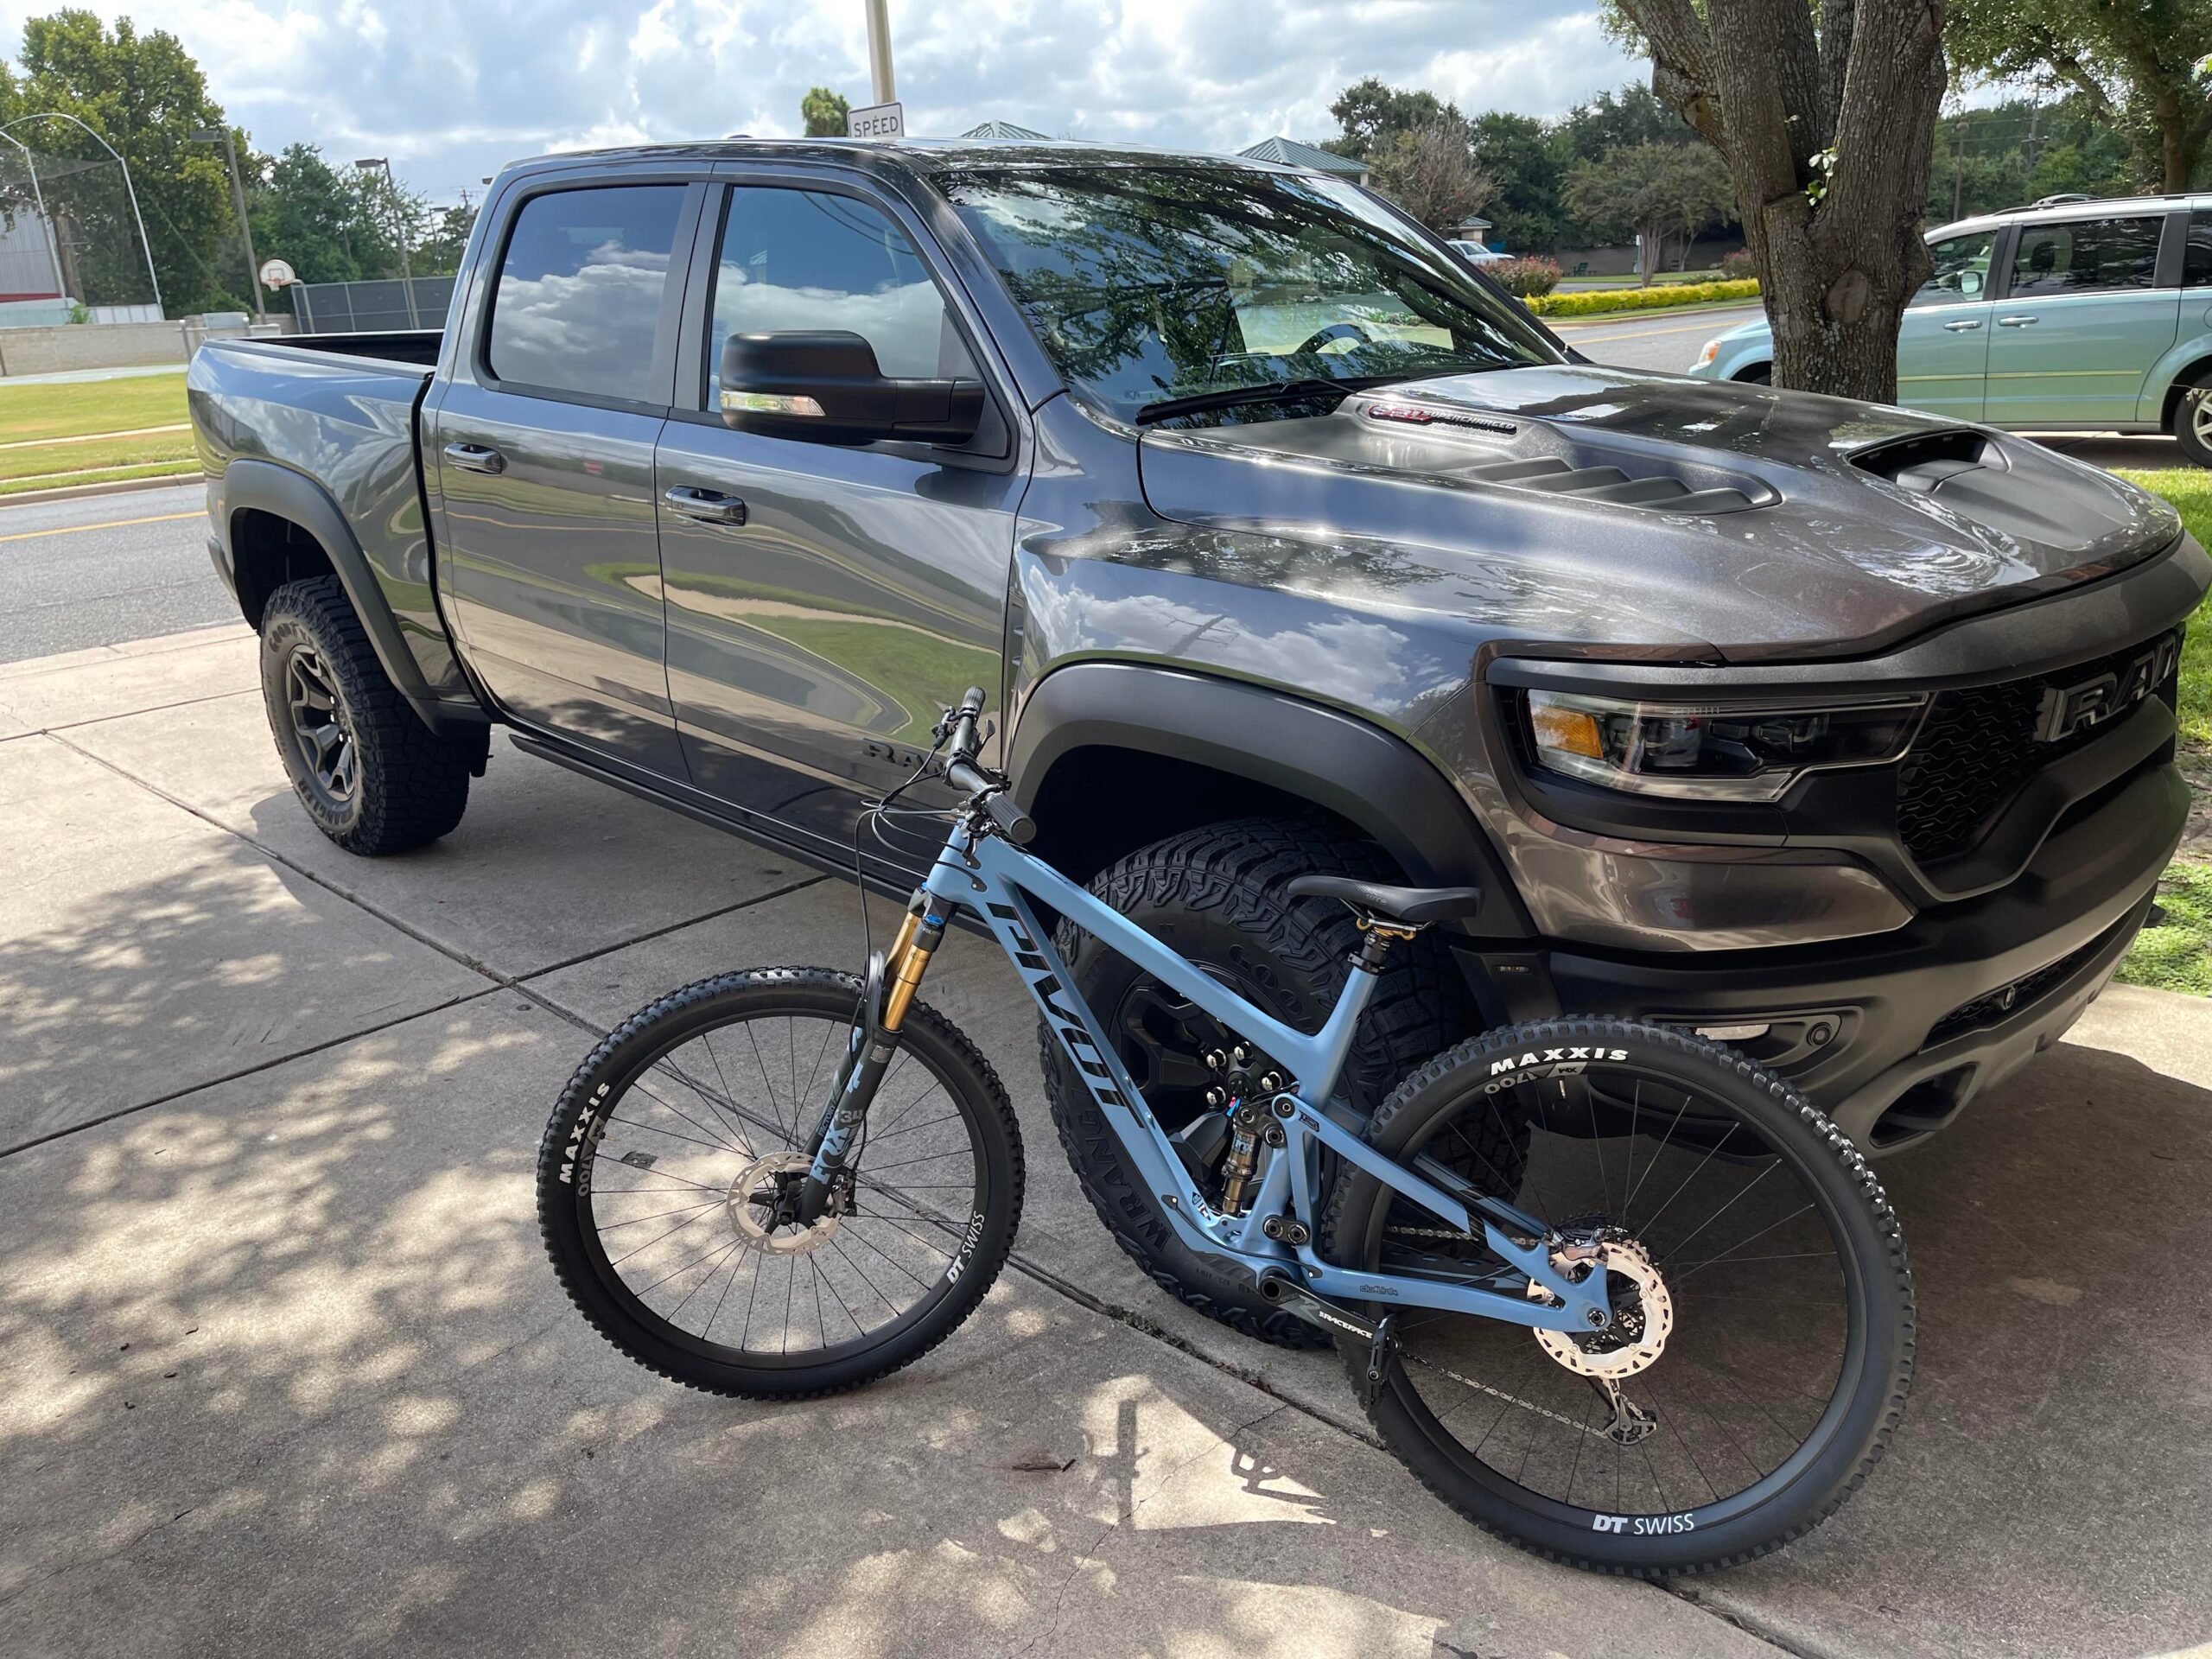 NBD (Pivot Trail 429 Pro XT/XR) in front of NT (Ram TRX). Bike is a replacement after my last bike was stolen out of my garage. : mountainbiking